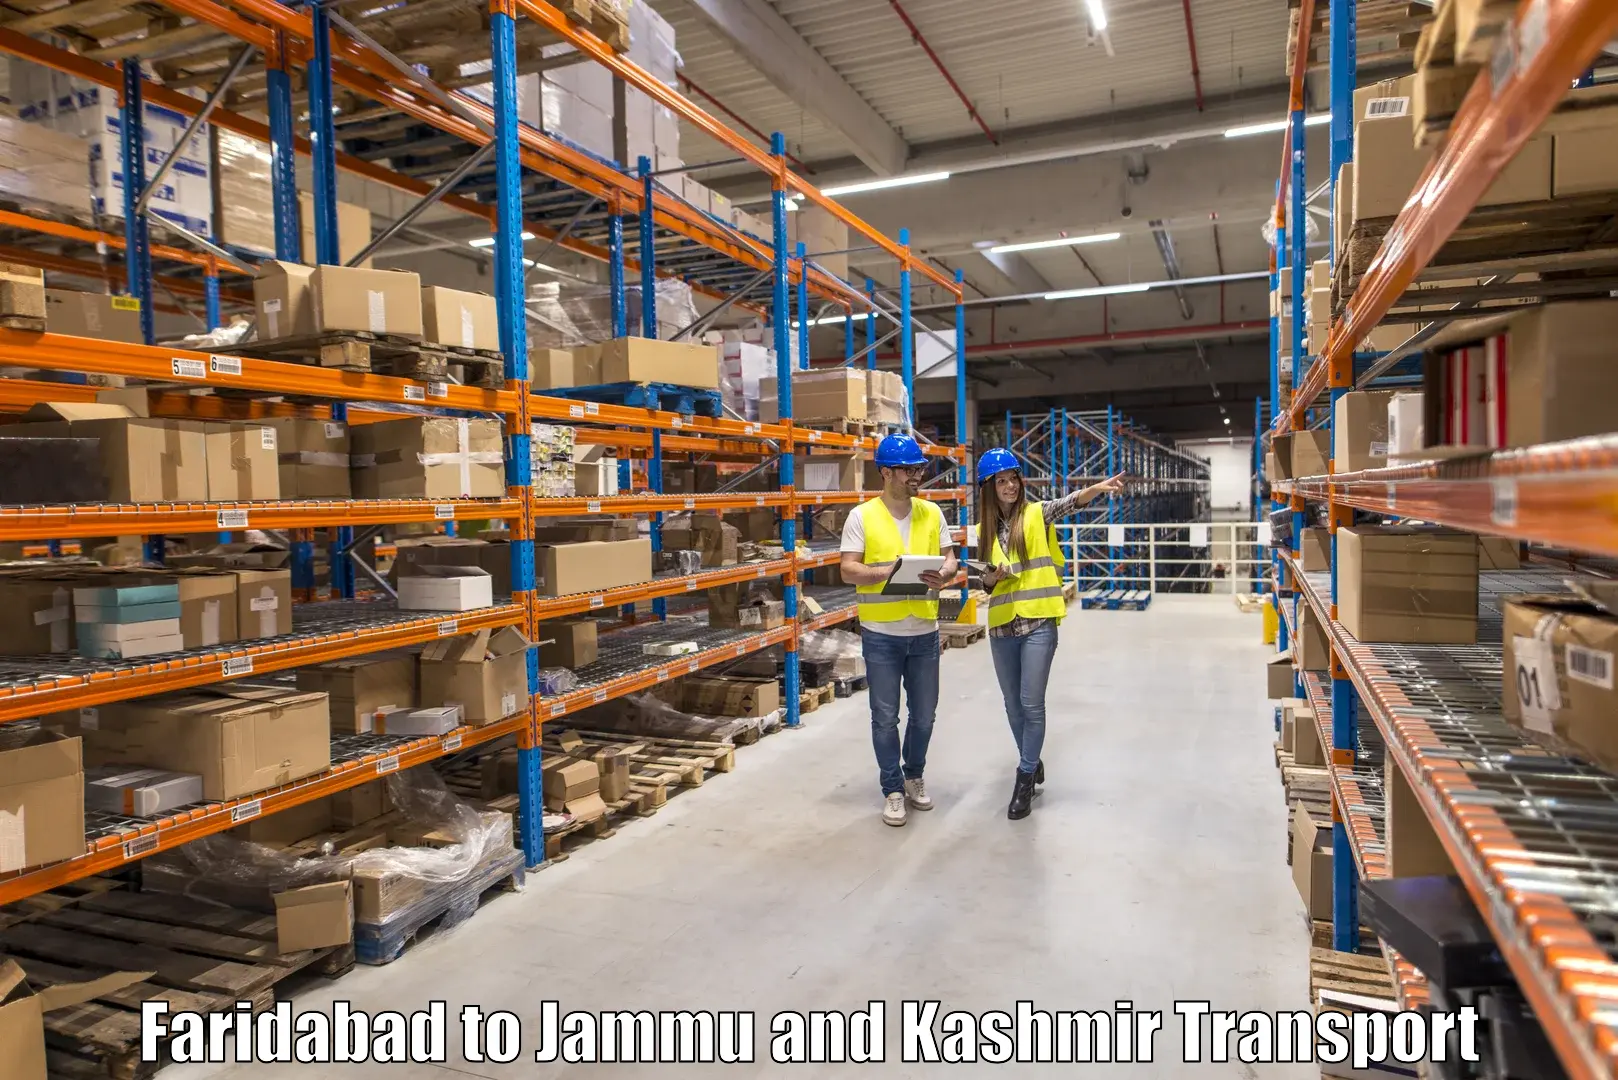 Truck transport companies in India Faridabad to Pulwama